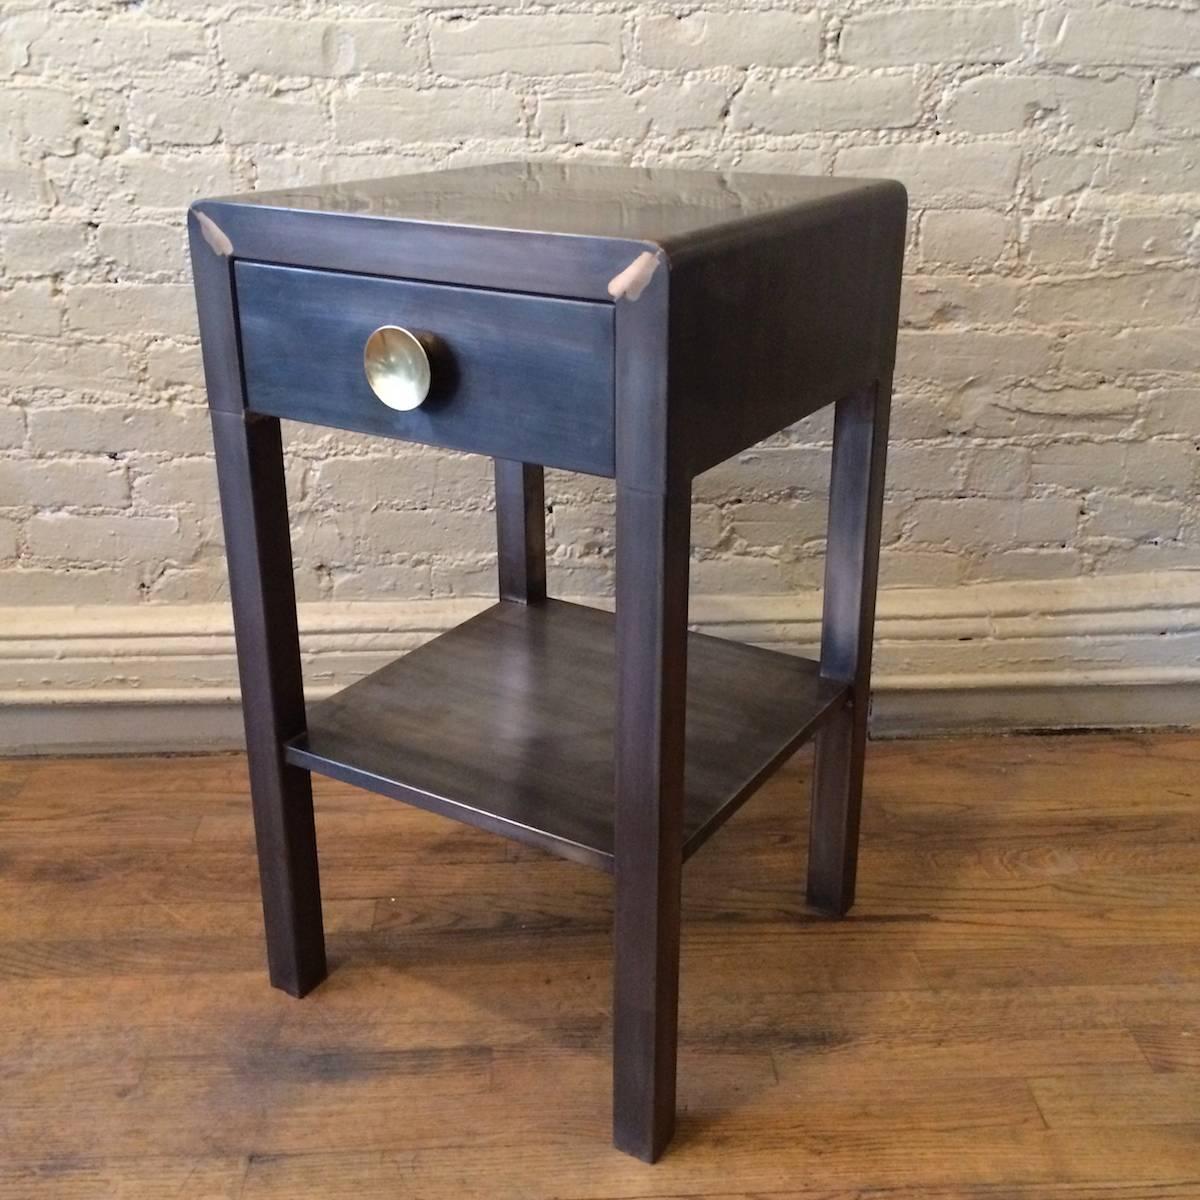 Machine Age, brushed steel, side table / nightstand designed by Norman Bel Geddes for Simmons Furniture Company is newly restored in a gunmetal finish with contrasting brass-plated handle.